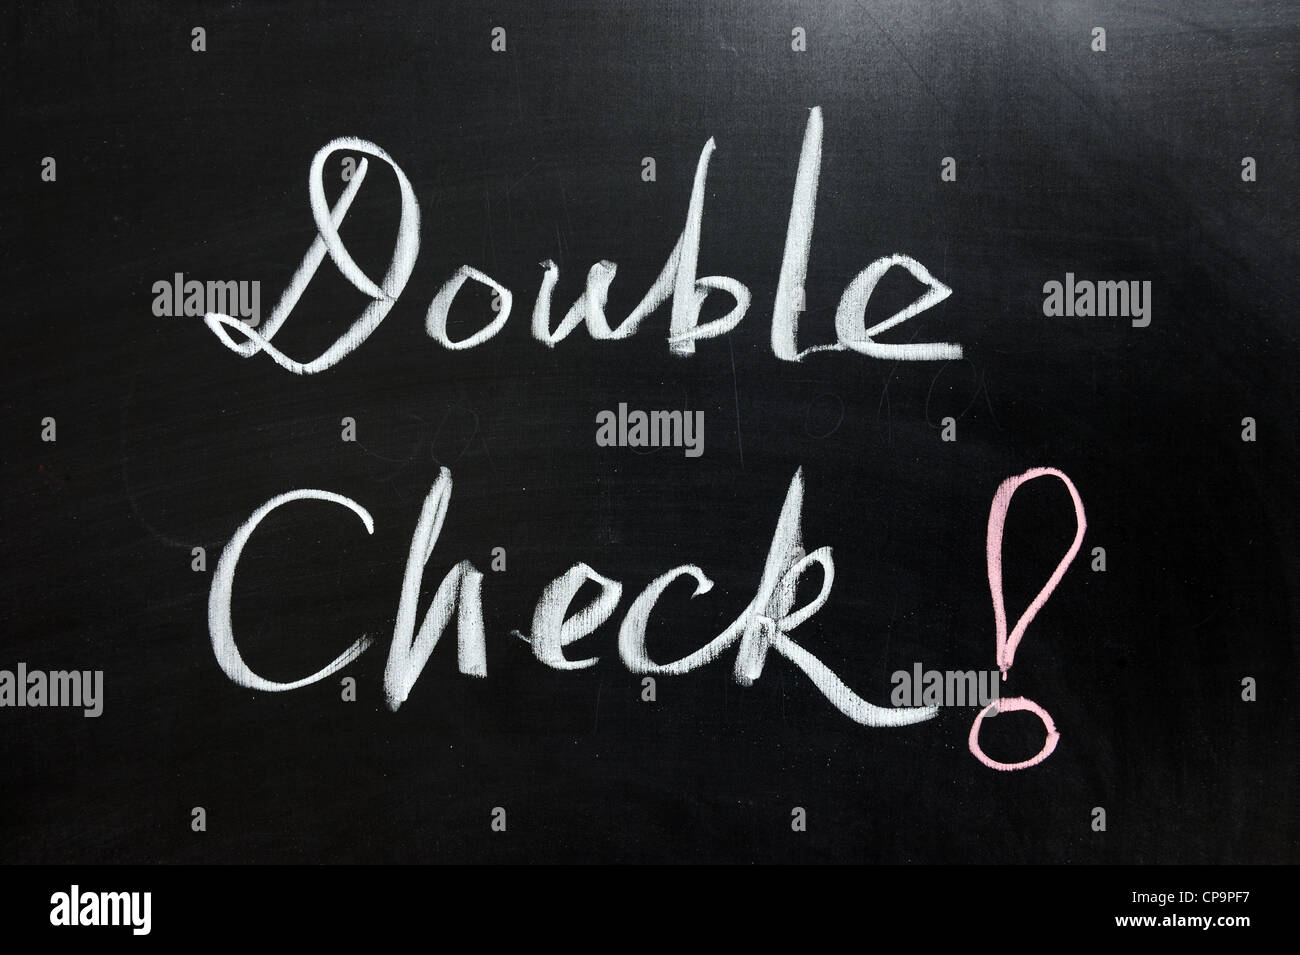 Chalk drawing - double check word on the chalkboard Stock Photo - Alamy